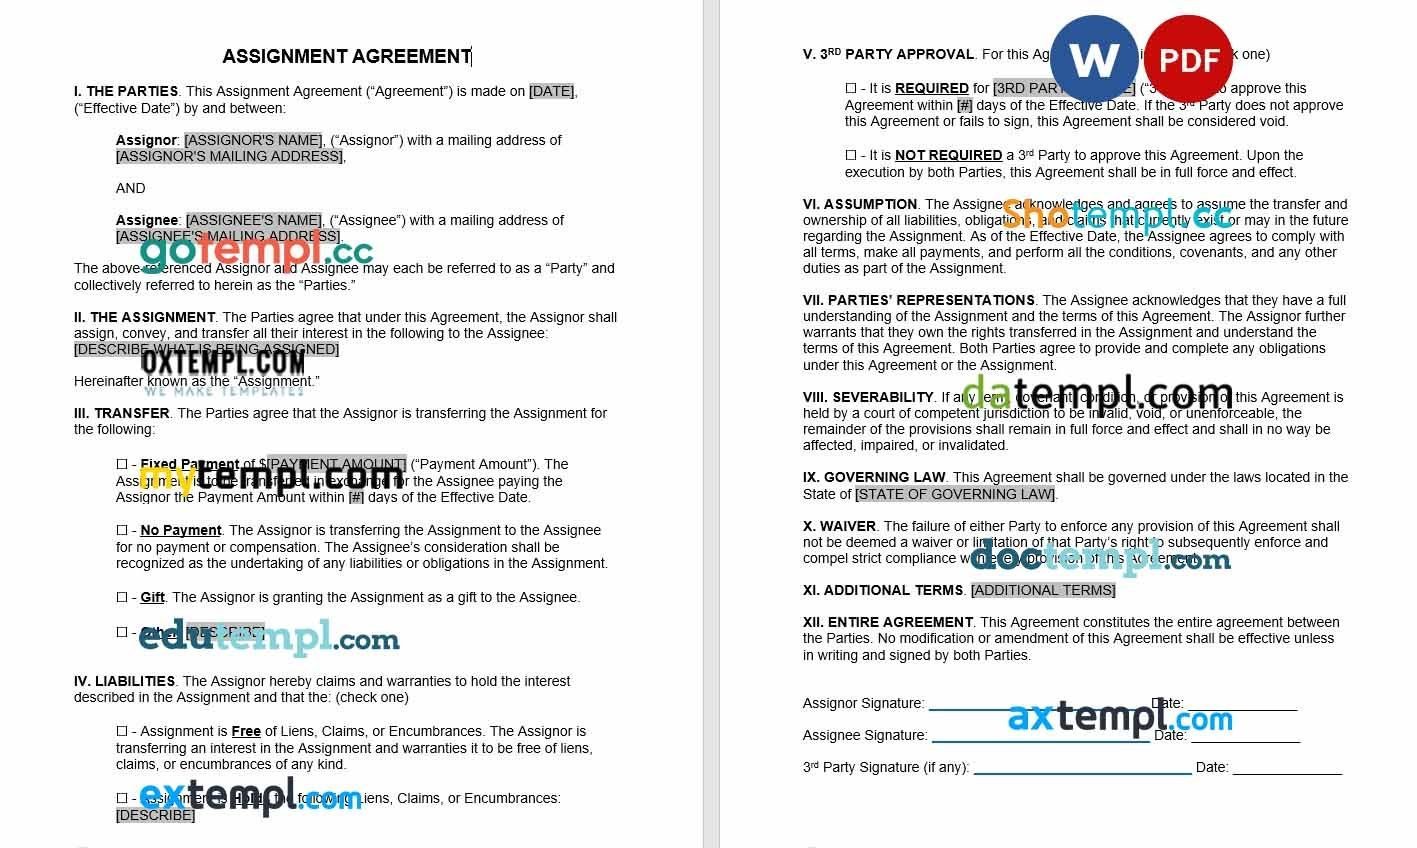 Assignment Agreement Form Word example, fully editable